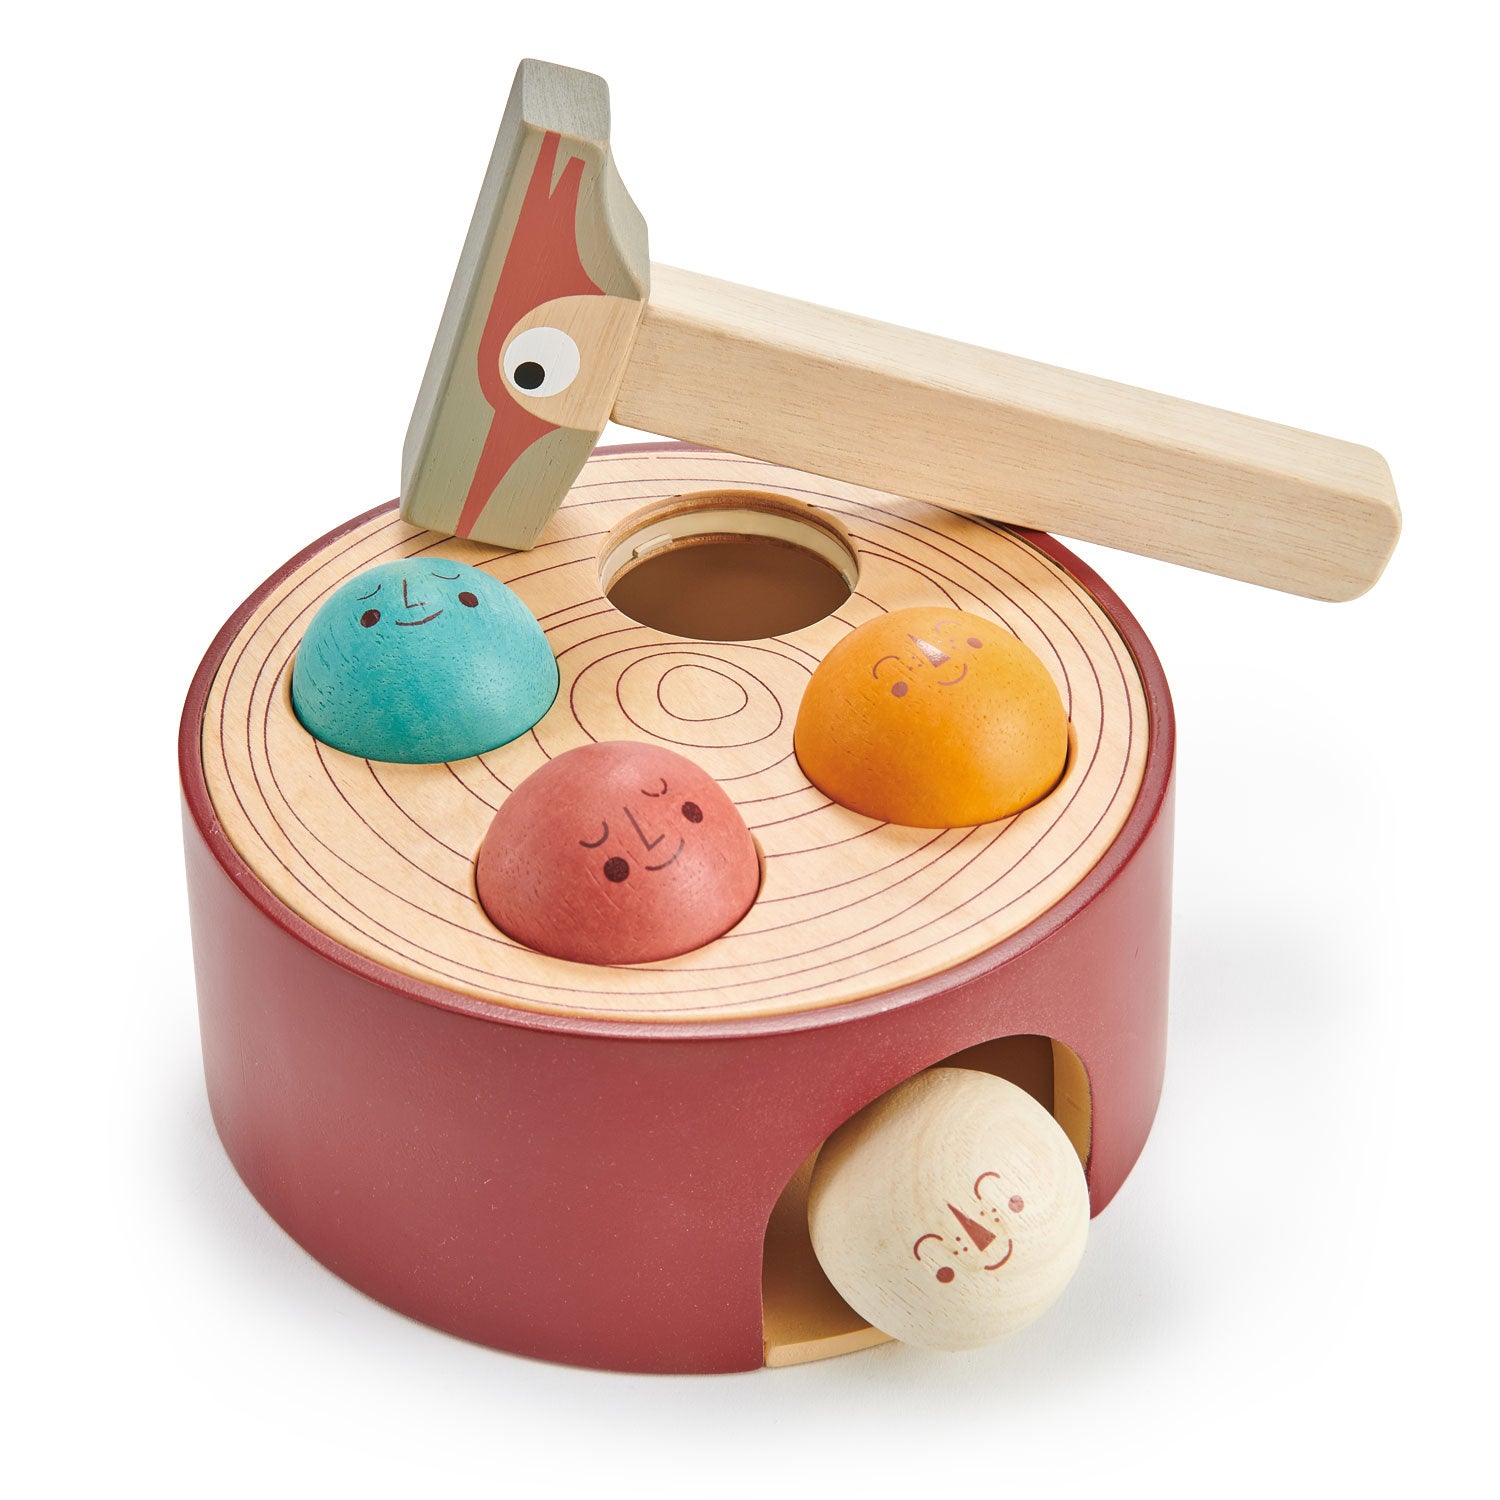 <p>A stylish hammer game for active toddlers who love to bash things. Based on a tree trunk, bash the four balls with a woodpecker styled hammer. Collect the balls as they fall through the hole and repeat.</p>
<p>Age range: 18 months +  </p>
<p>Product size: 6.69 x 6.69 x 2.95&quot;  </p>
<p> Weight: 1.47 lbs</p>
